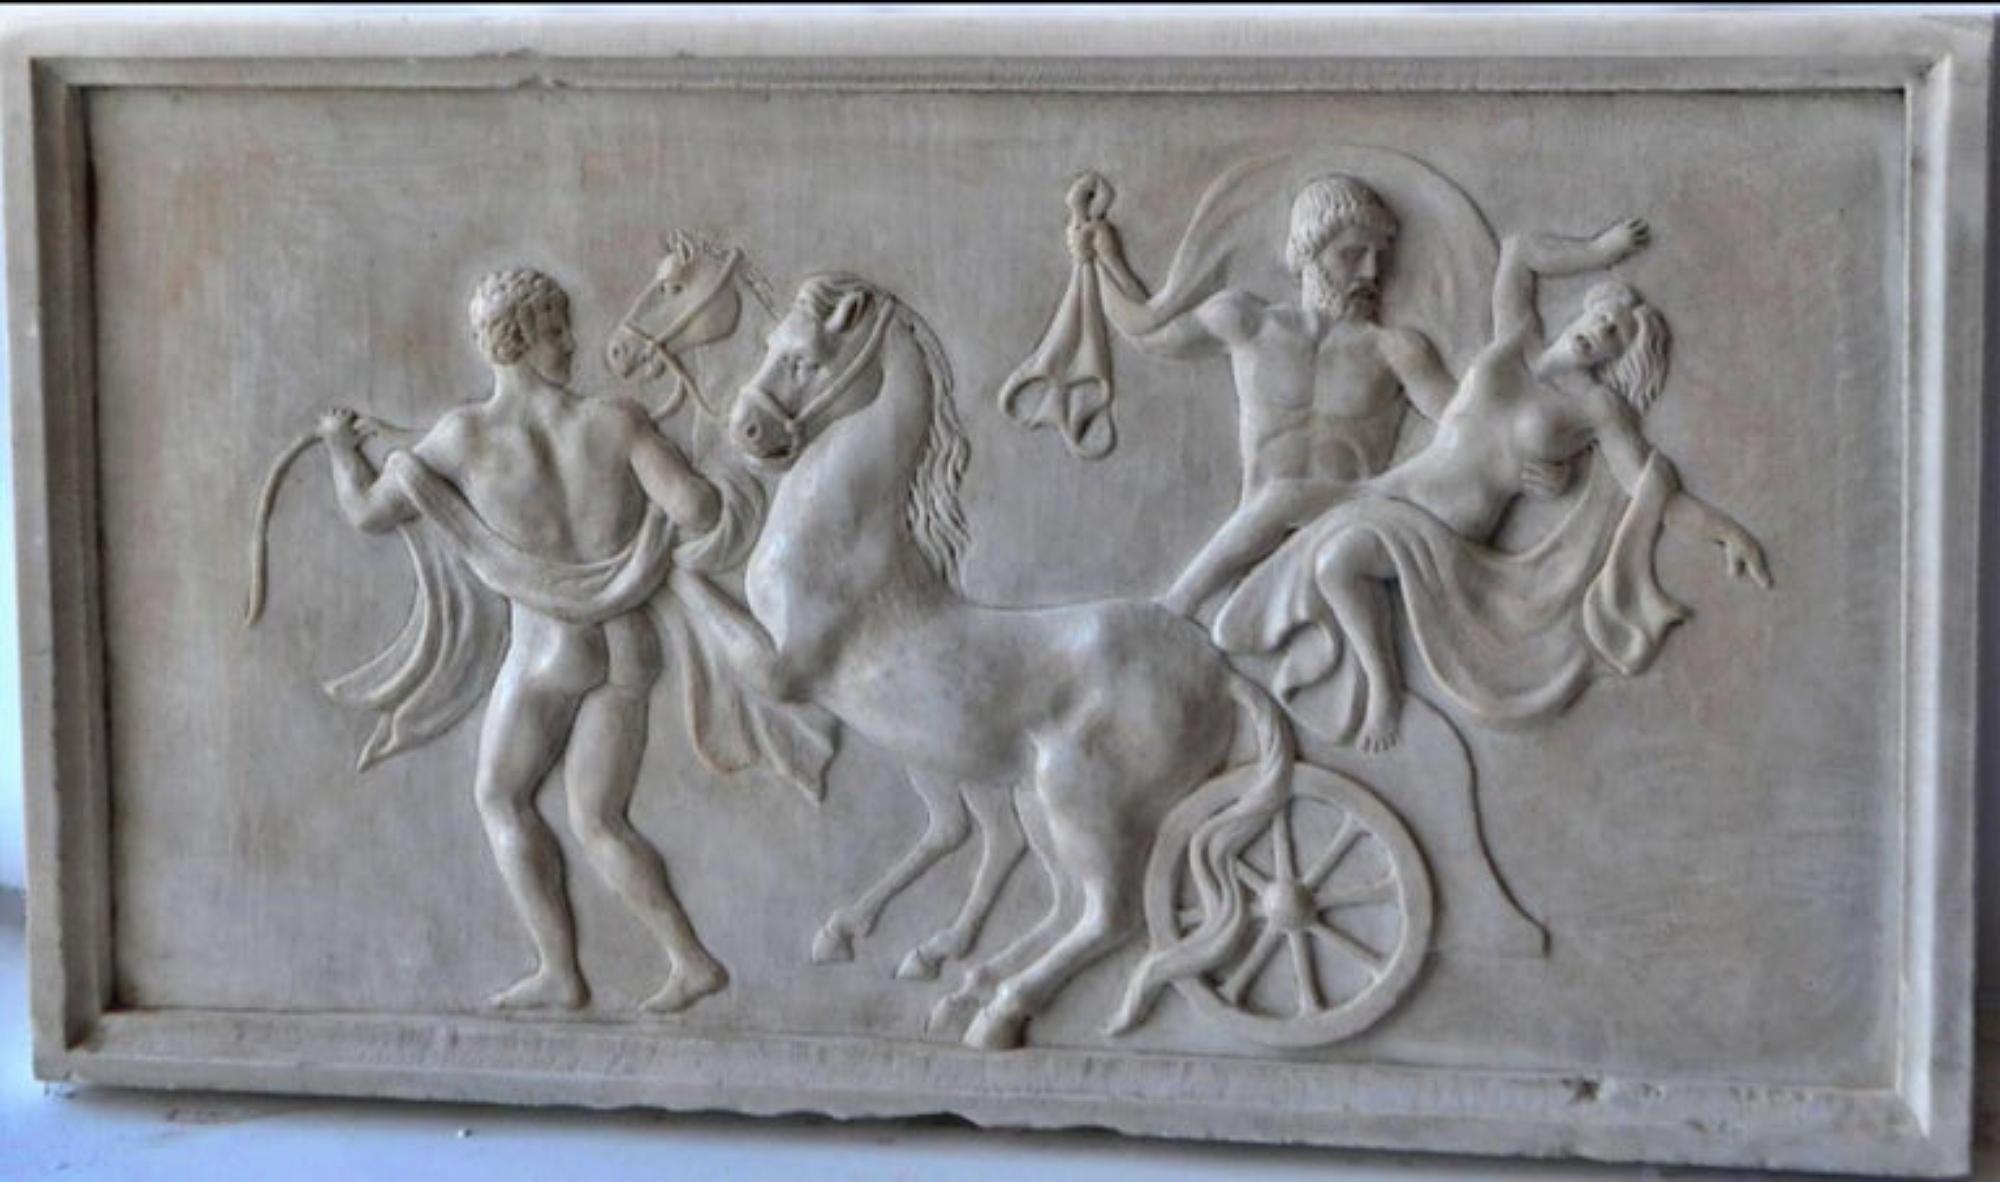 High relief in white Carrara marble, 
Representing the scene of the Rape of Proserpina by the god Pluto. 
Dimensions: 83 x 46 x 5cm. 
Weight kg 50
Very good condition.